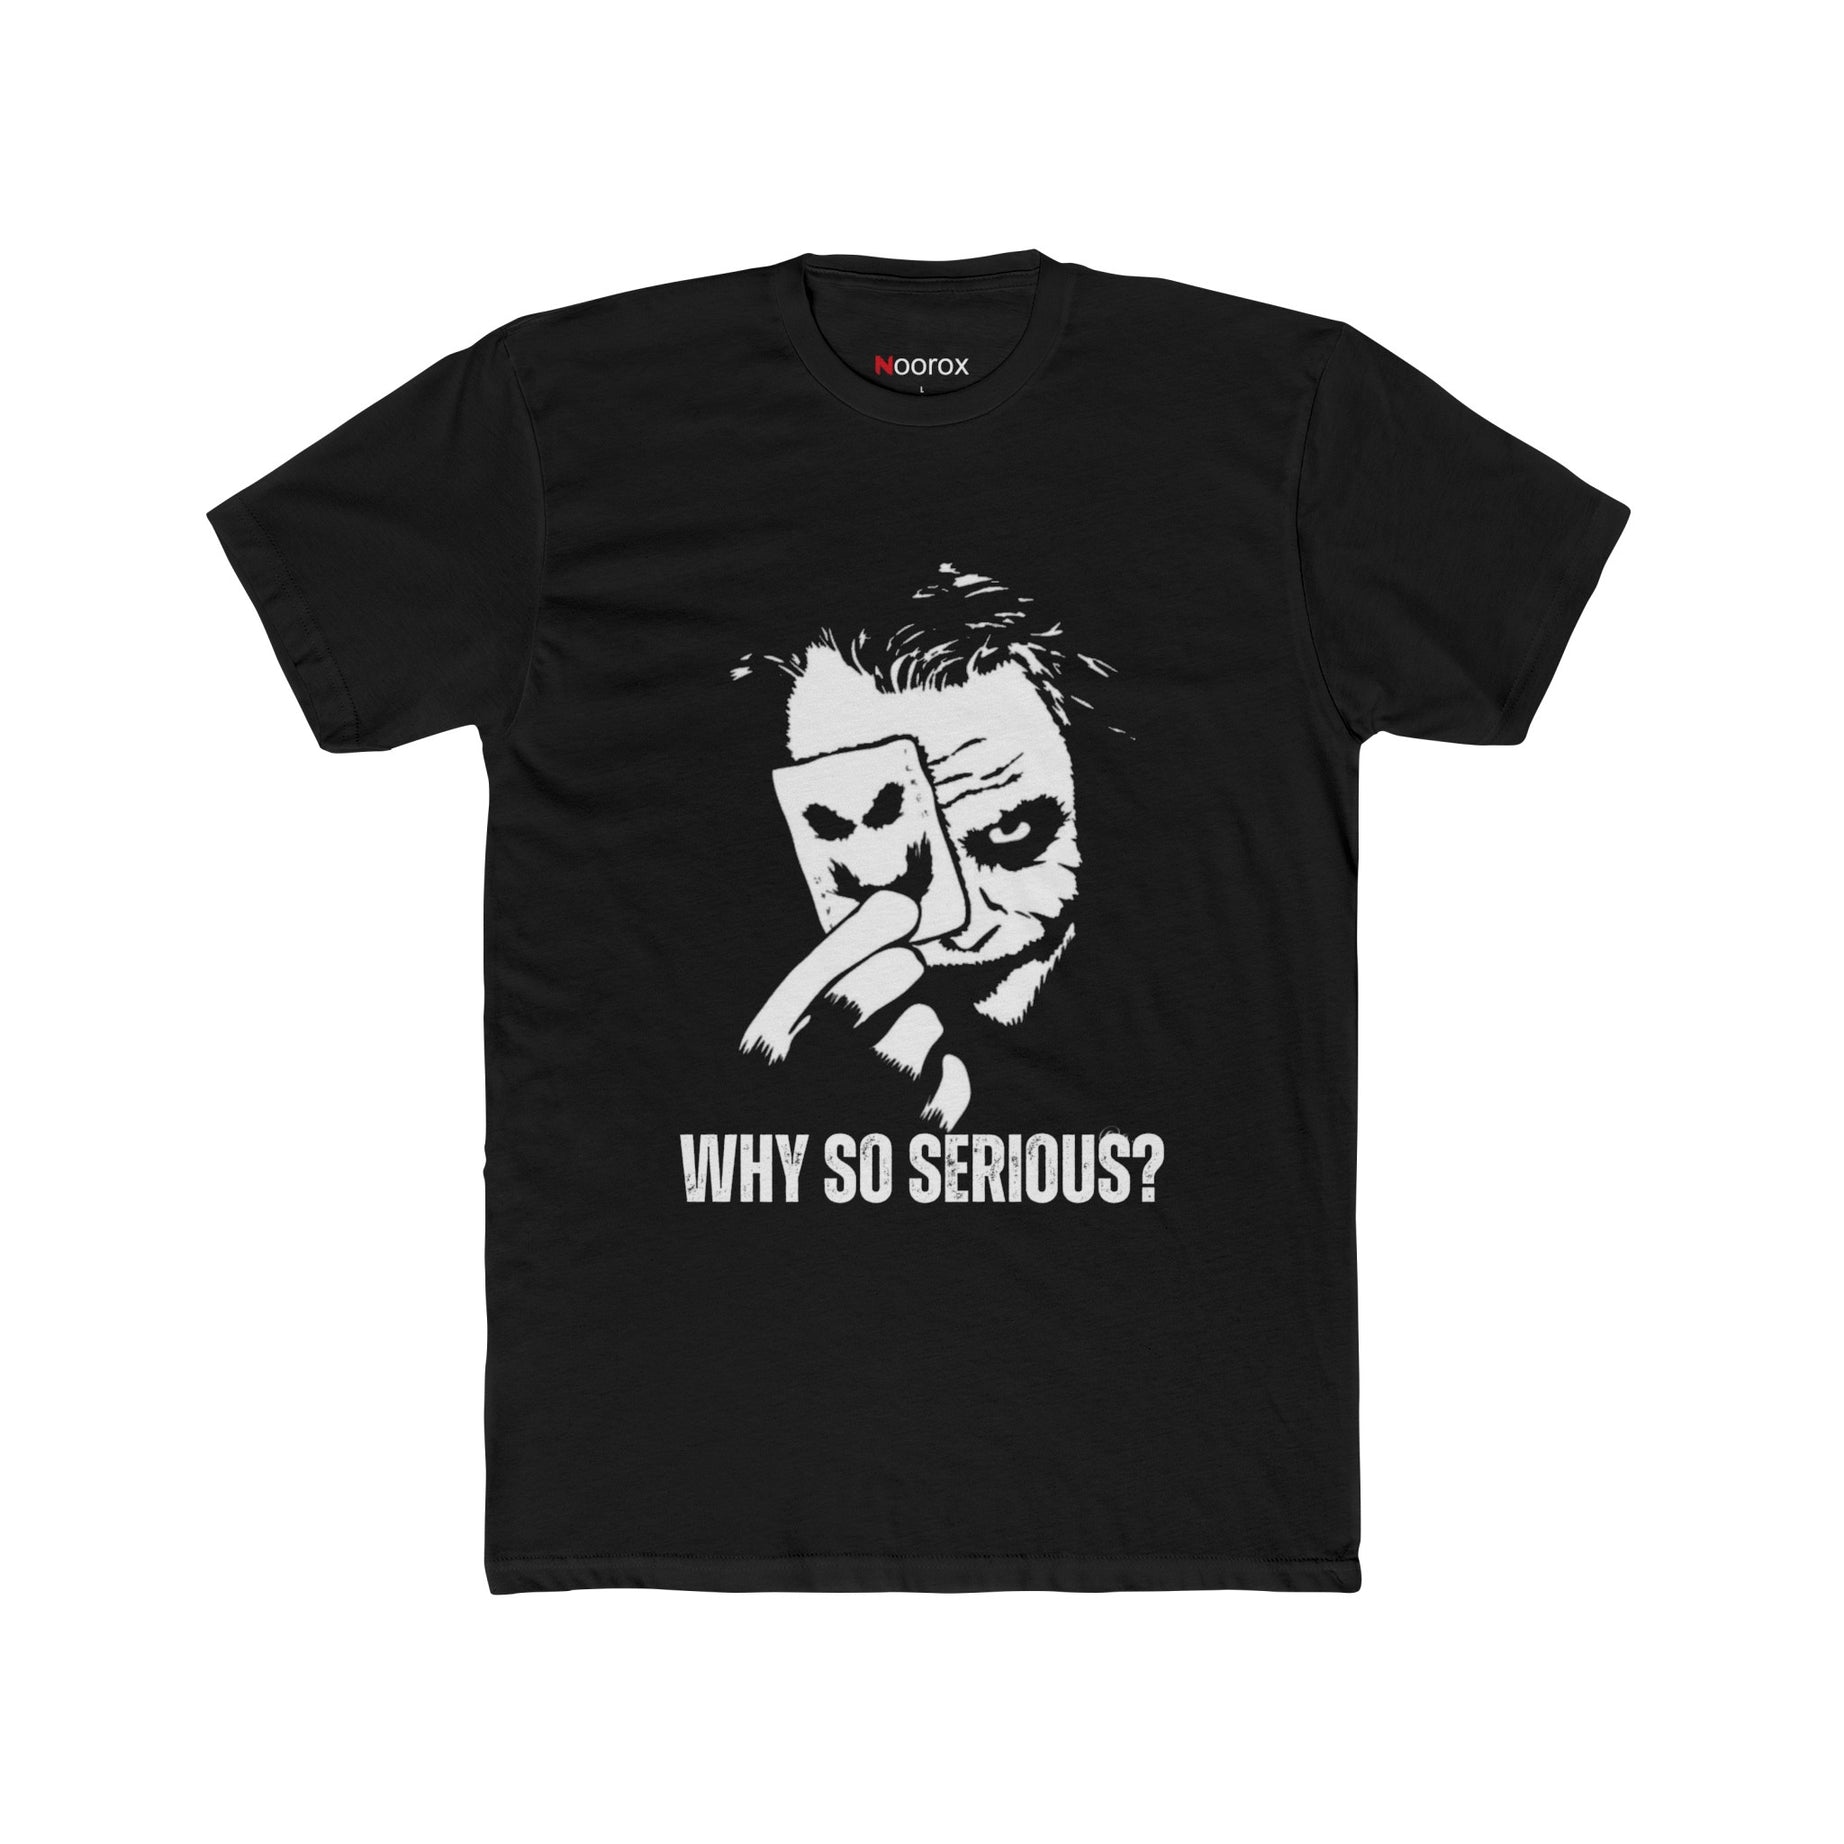 WHY SO SERIOUS T-SHIRT